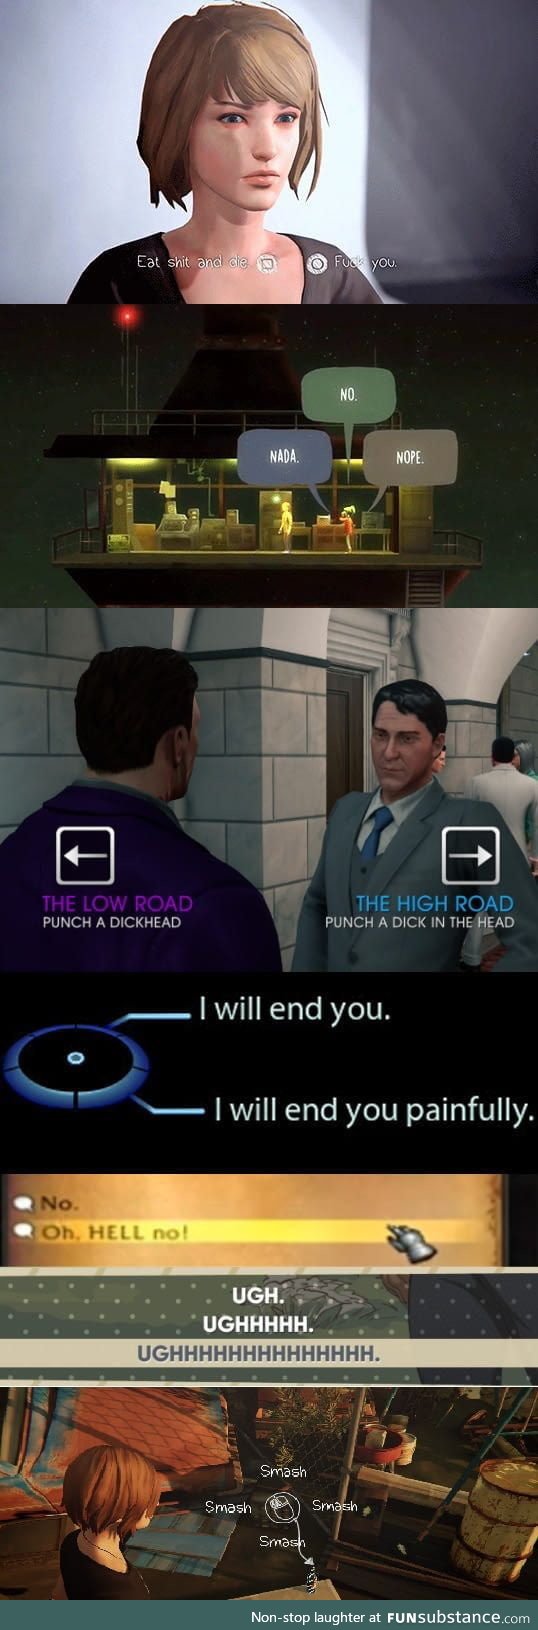 Meaningful choices in video games